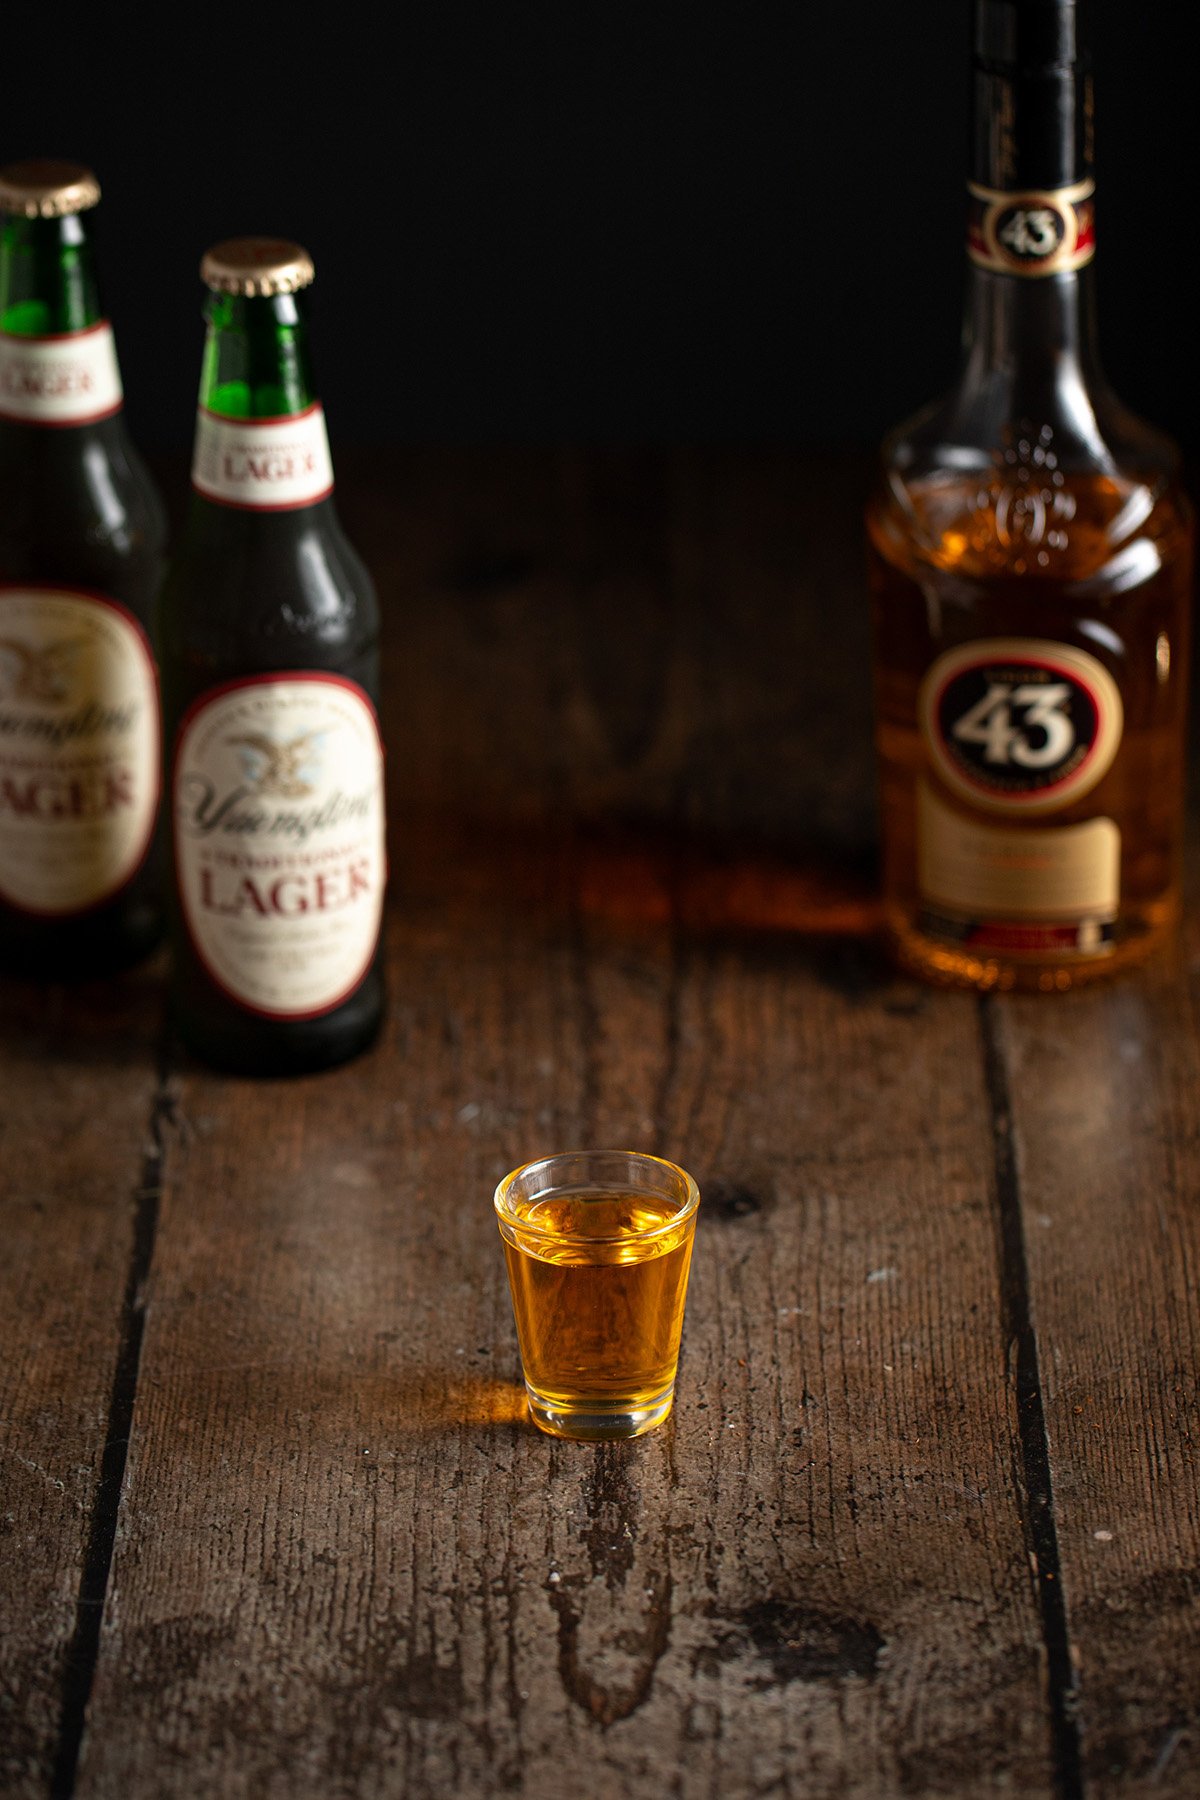 a shot glass with licor 43.